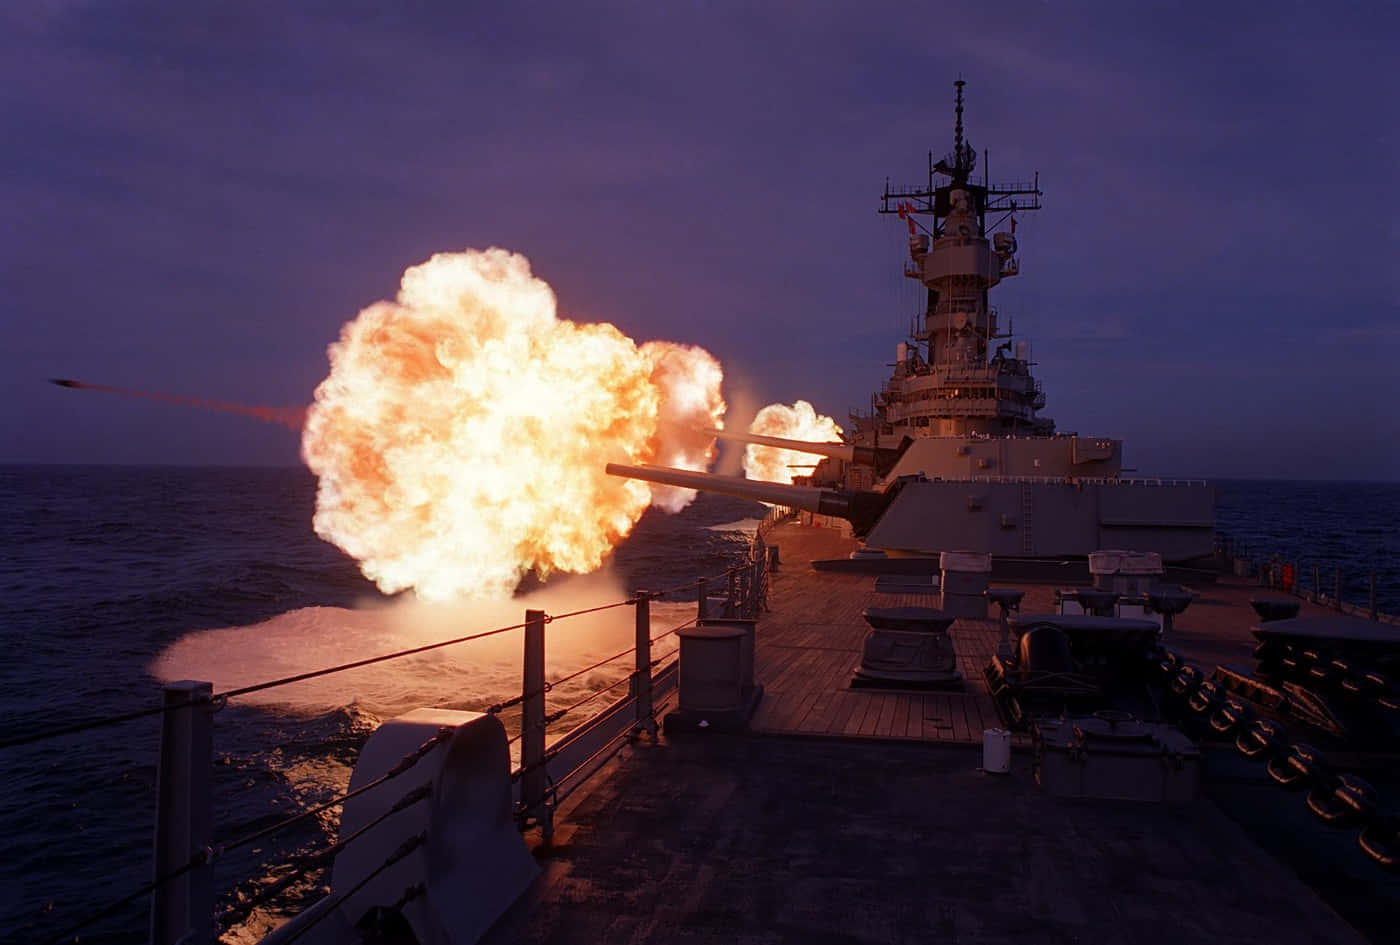 A Battleship With A Fire On The Deck